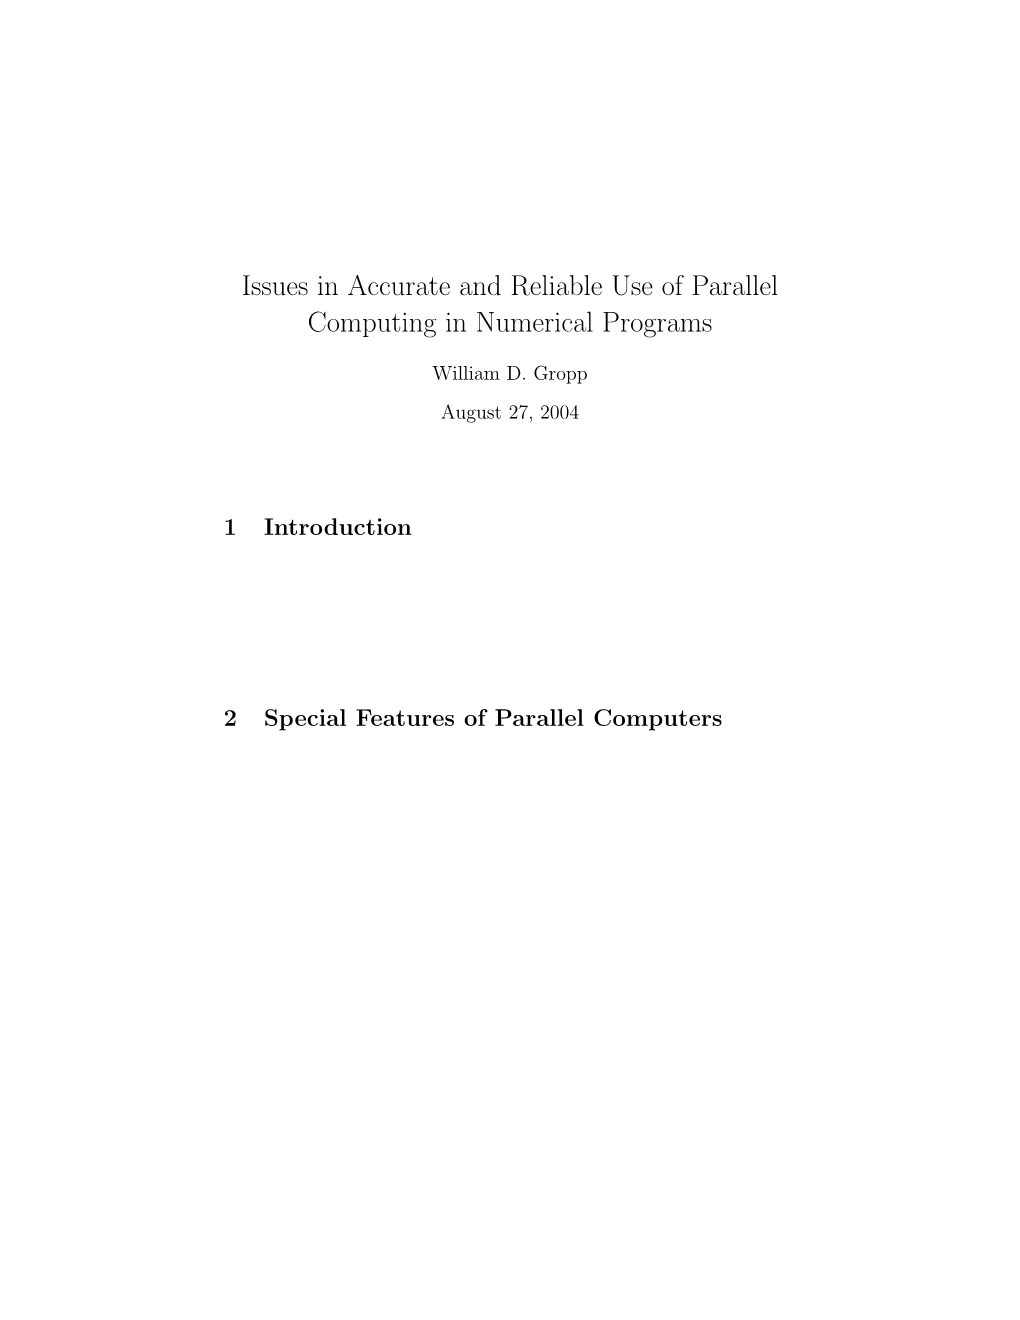 Issues in Accurate and Reliable Use of Parallel Computing in Numerical Programs